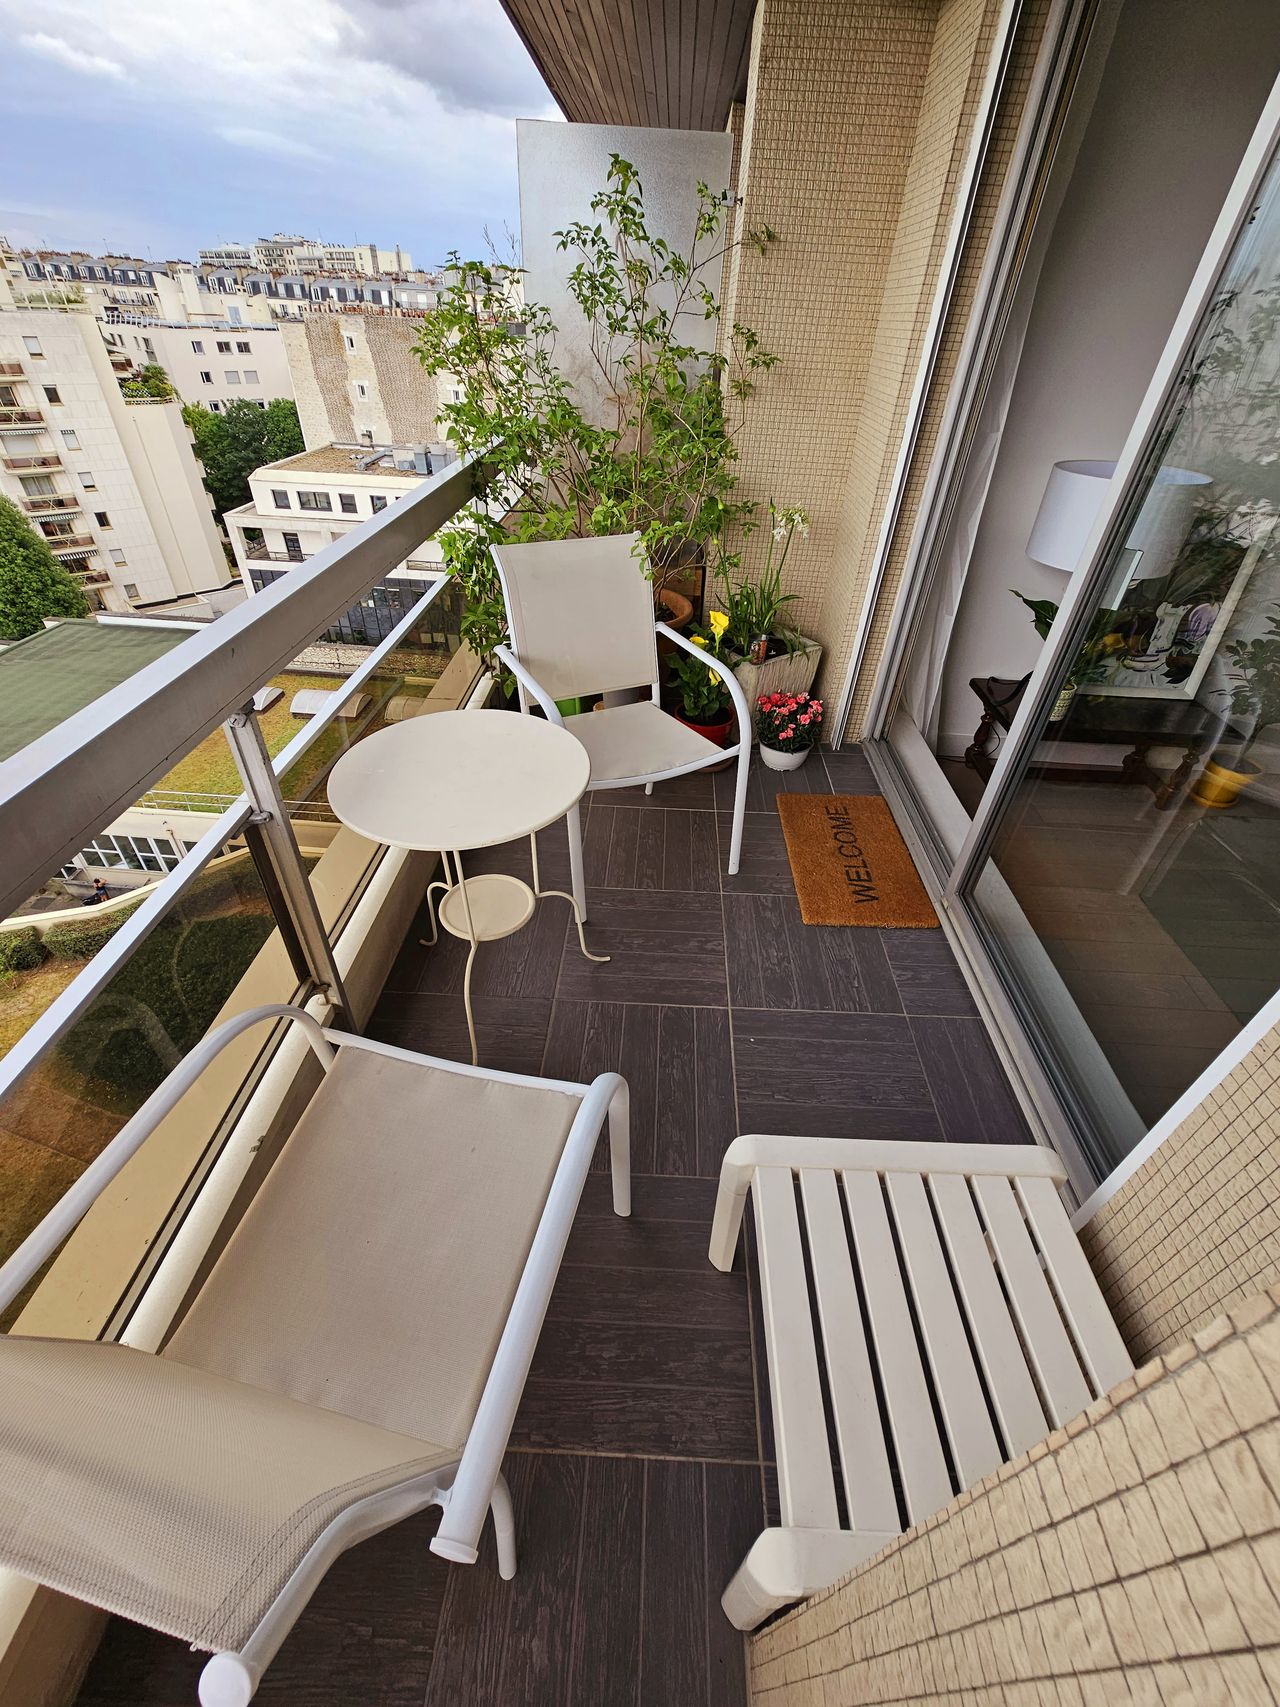 Beautiful flat with balcony and view, 12th arrondissement, Daumesnil sector